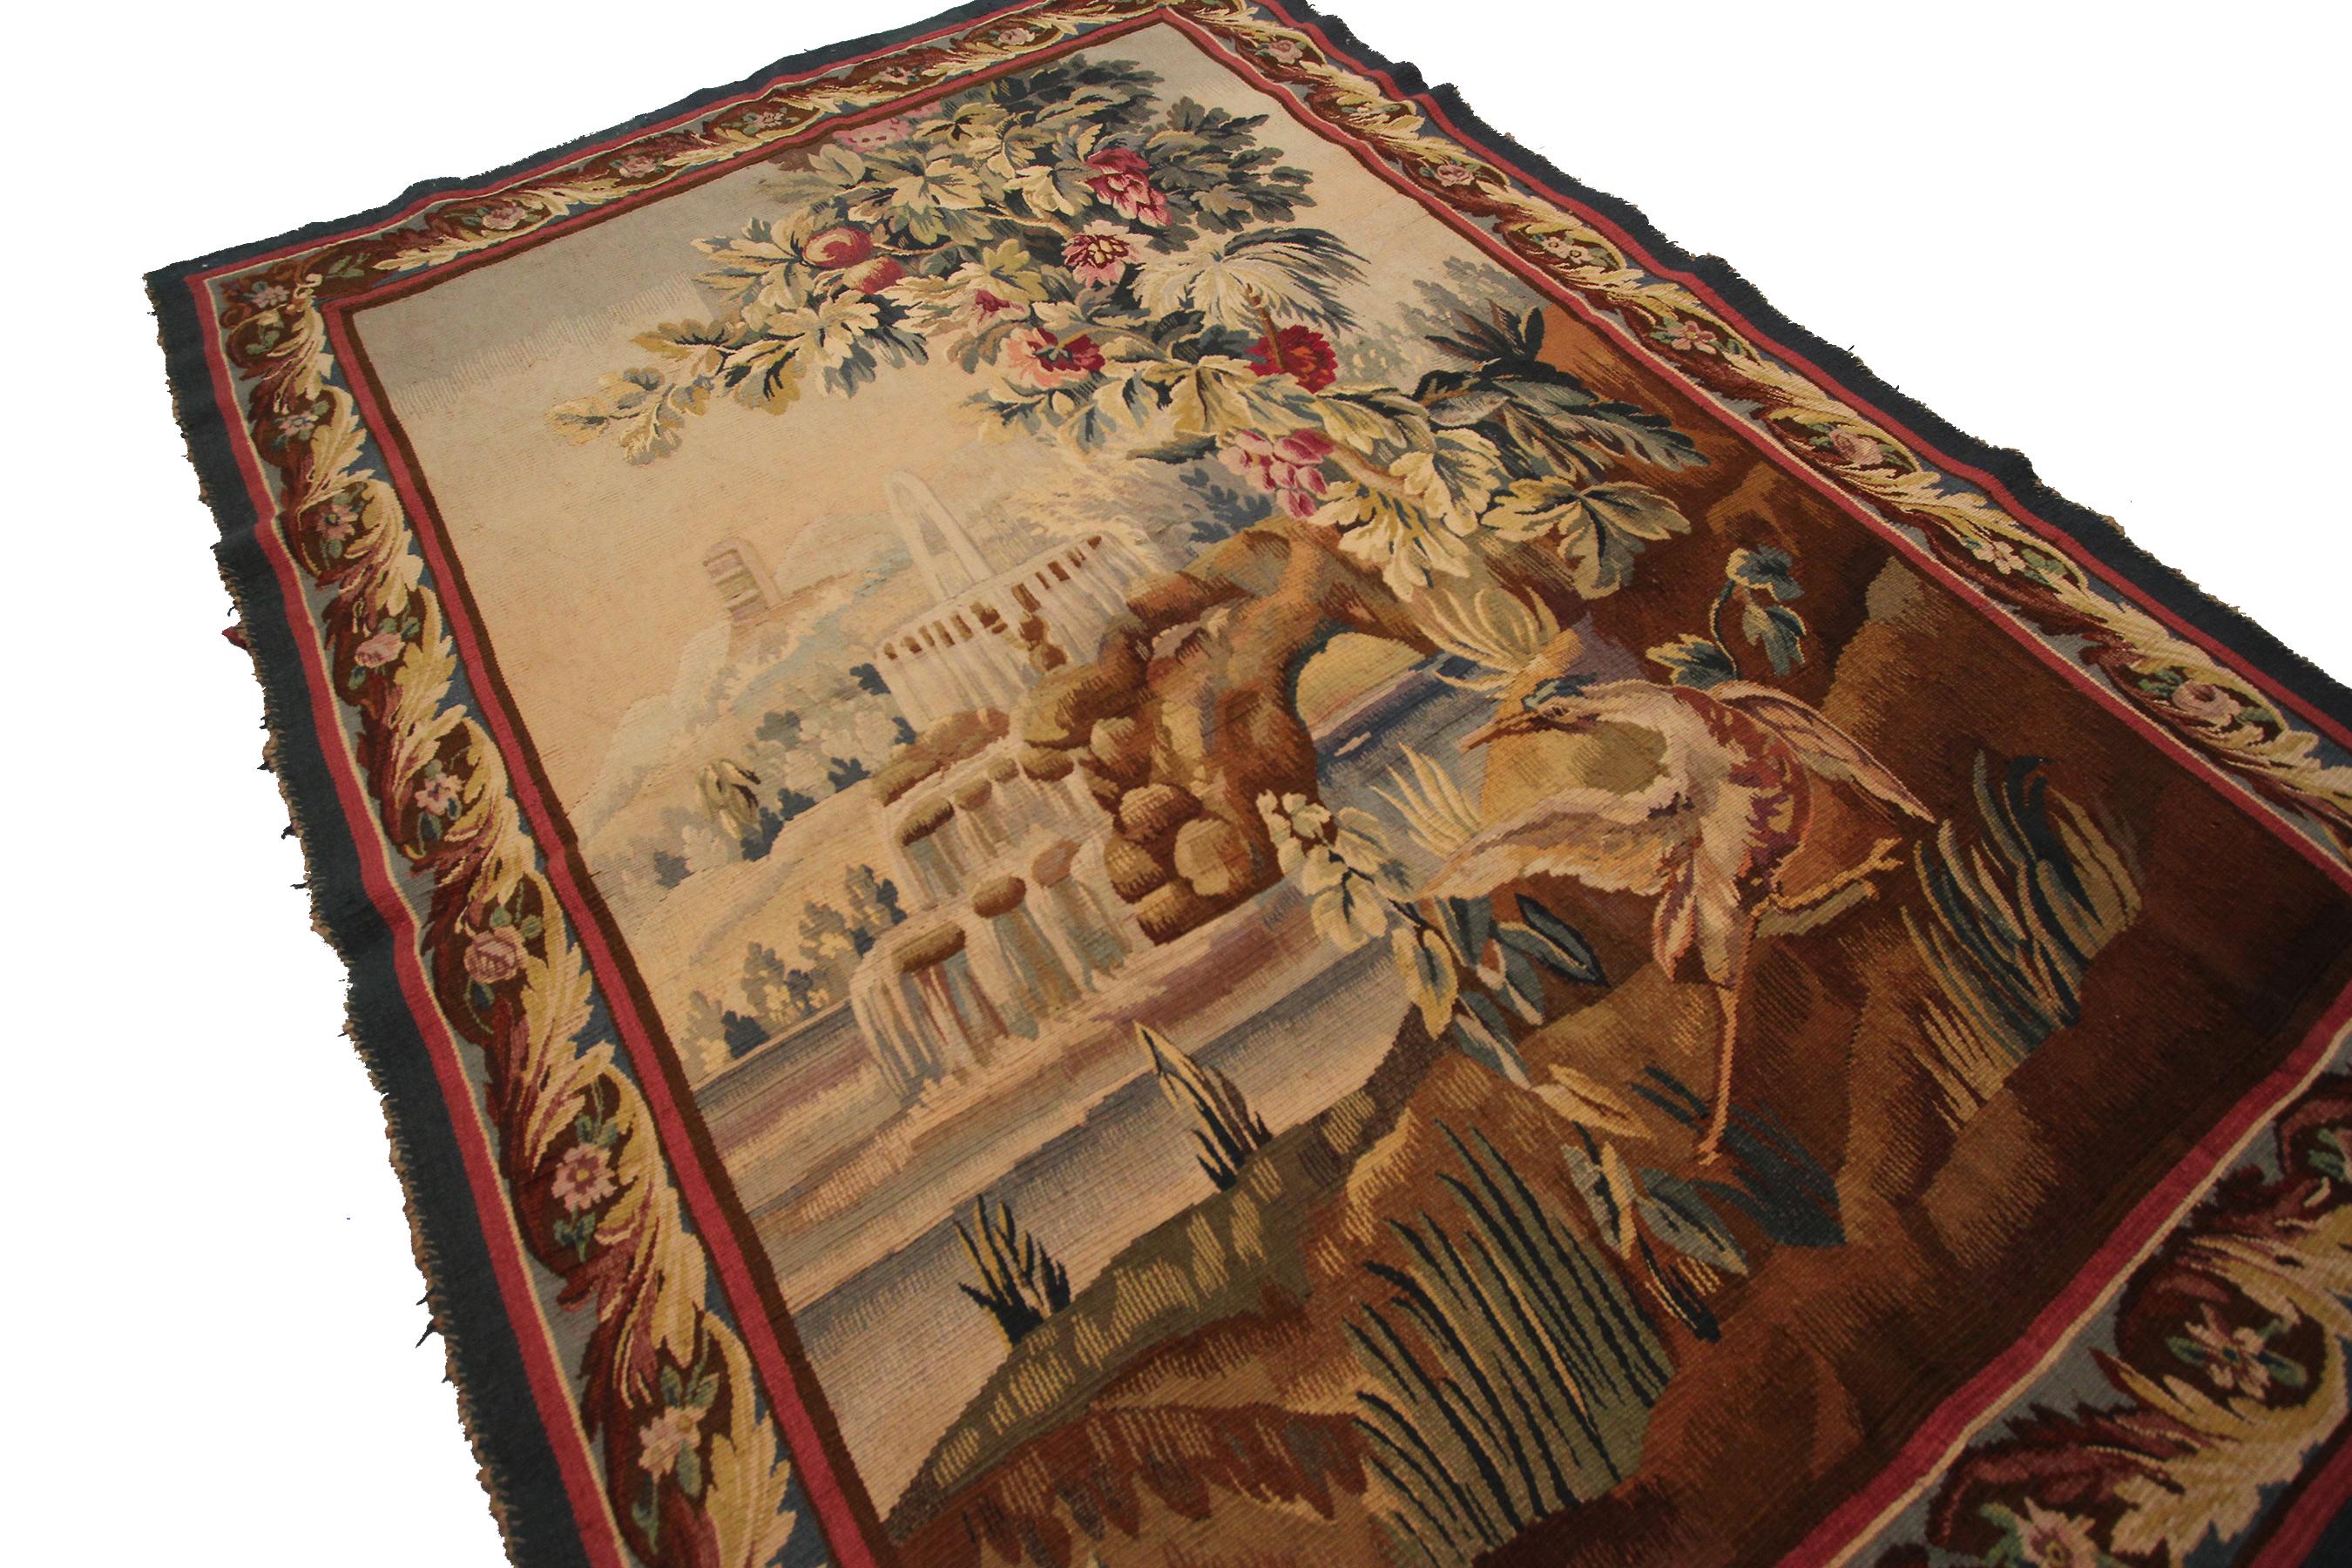 Antique French Tapestry Rare Fountain and scenery Large Tapestry 5x7 1920

circa 1920

